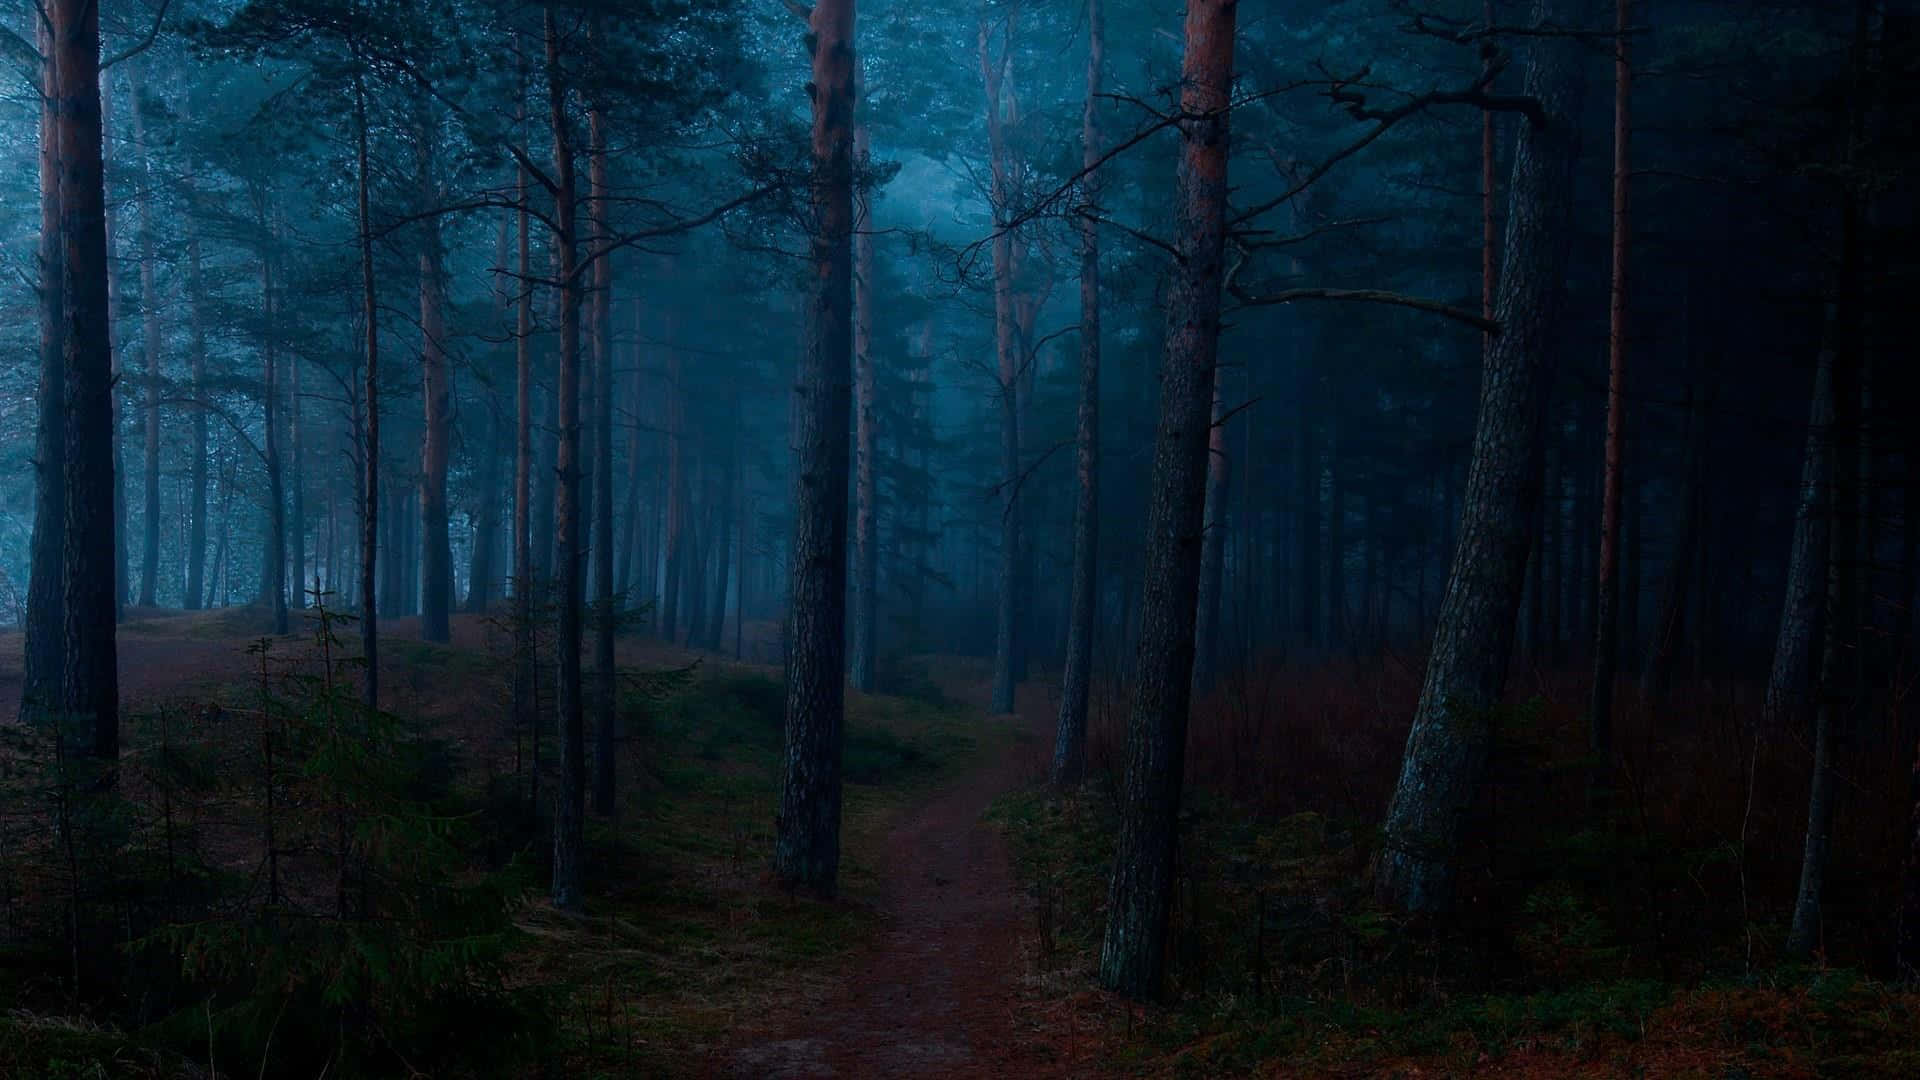 "Explore the Magic of a Dark Forest"